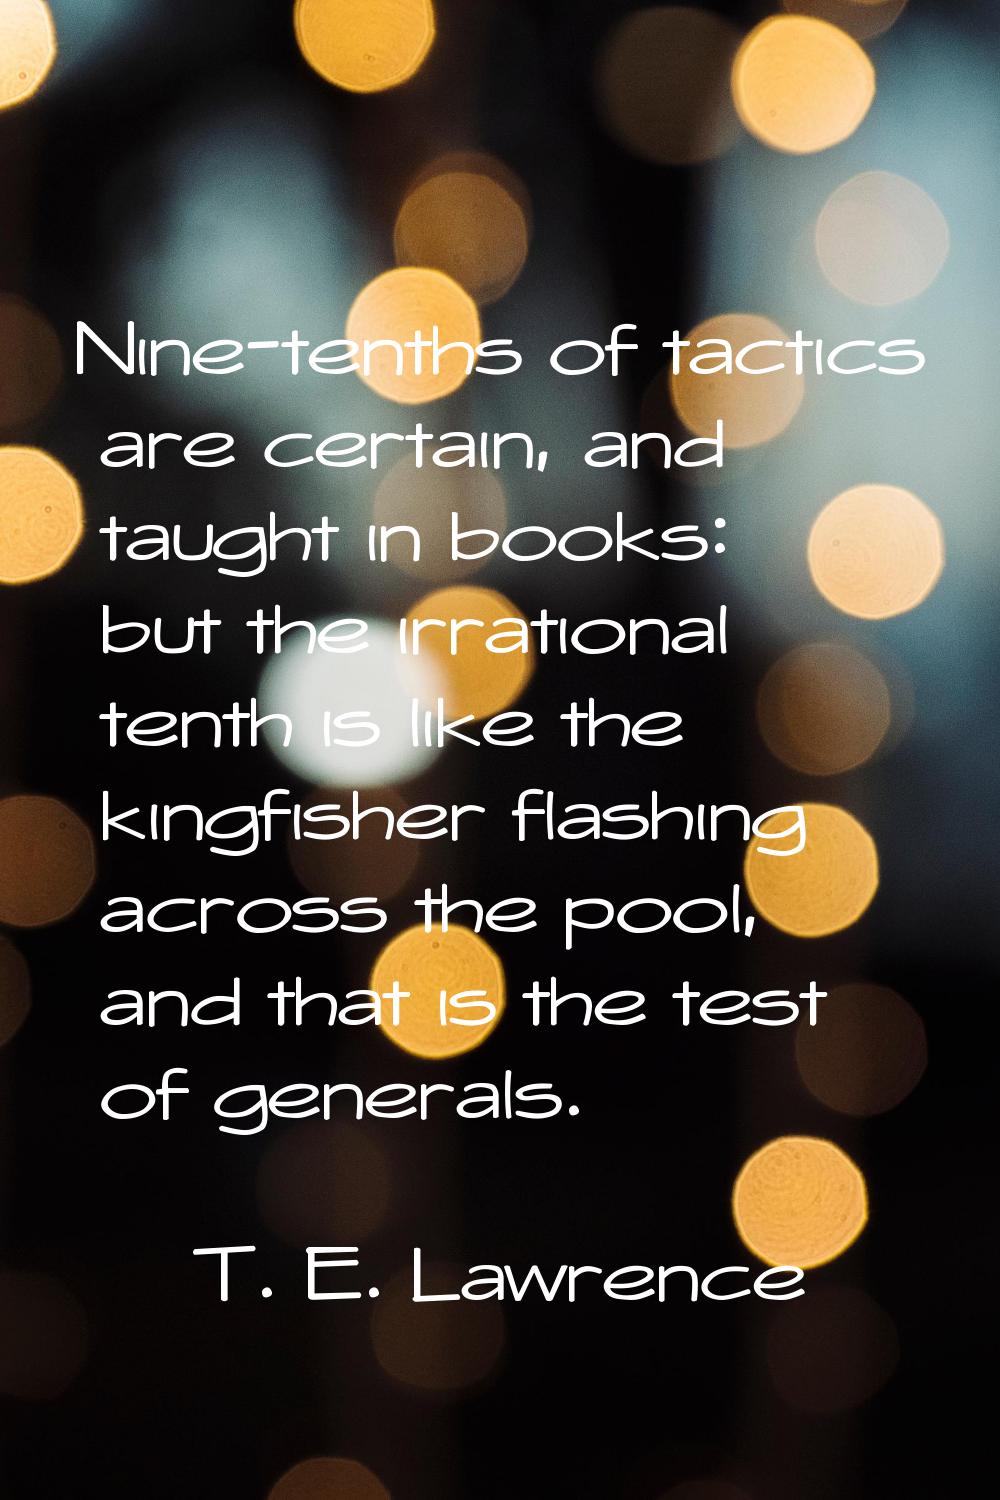 Nine-tenths of tactics are certain, and taught in books: but the irrational tenth is like the kingf